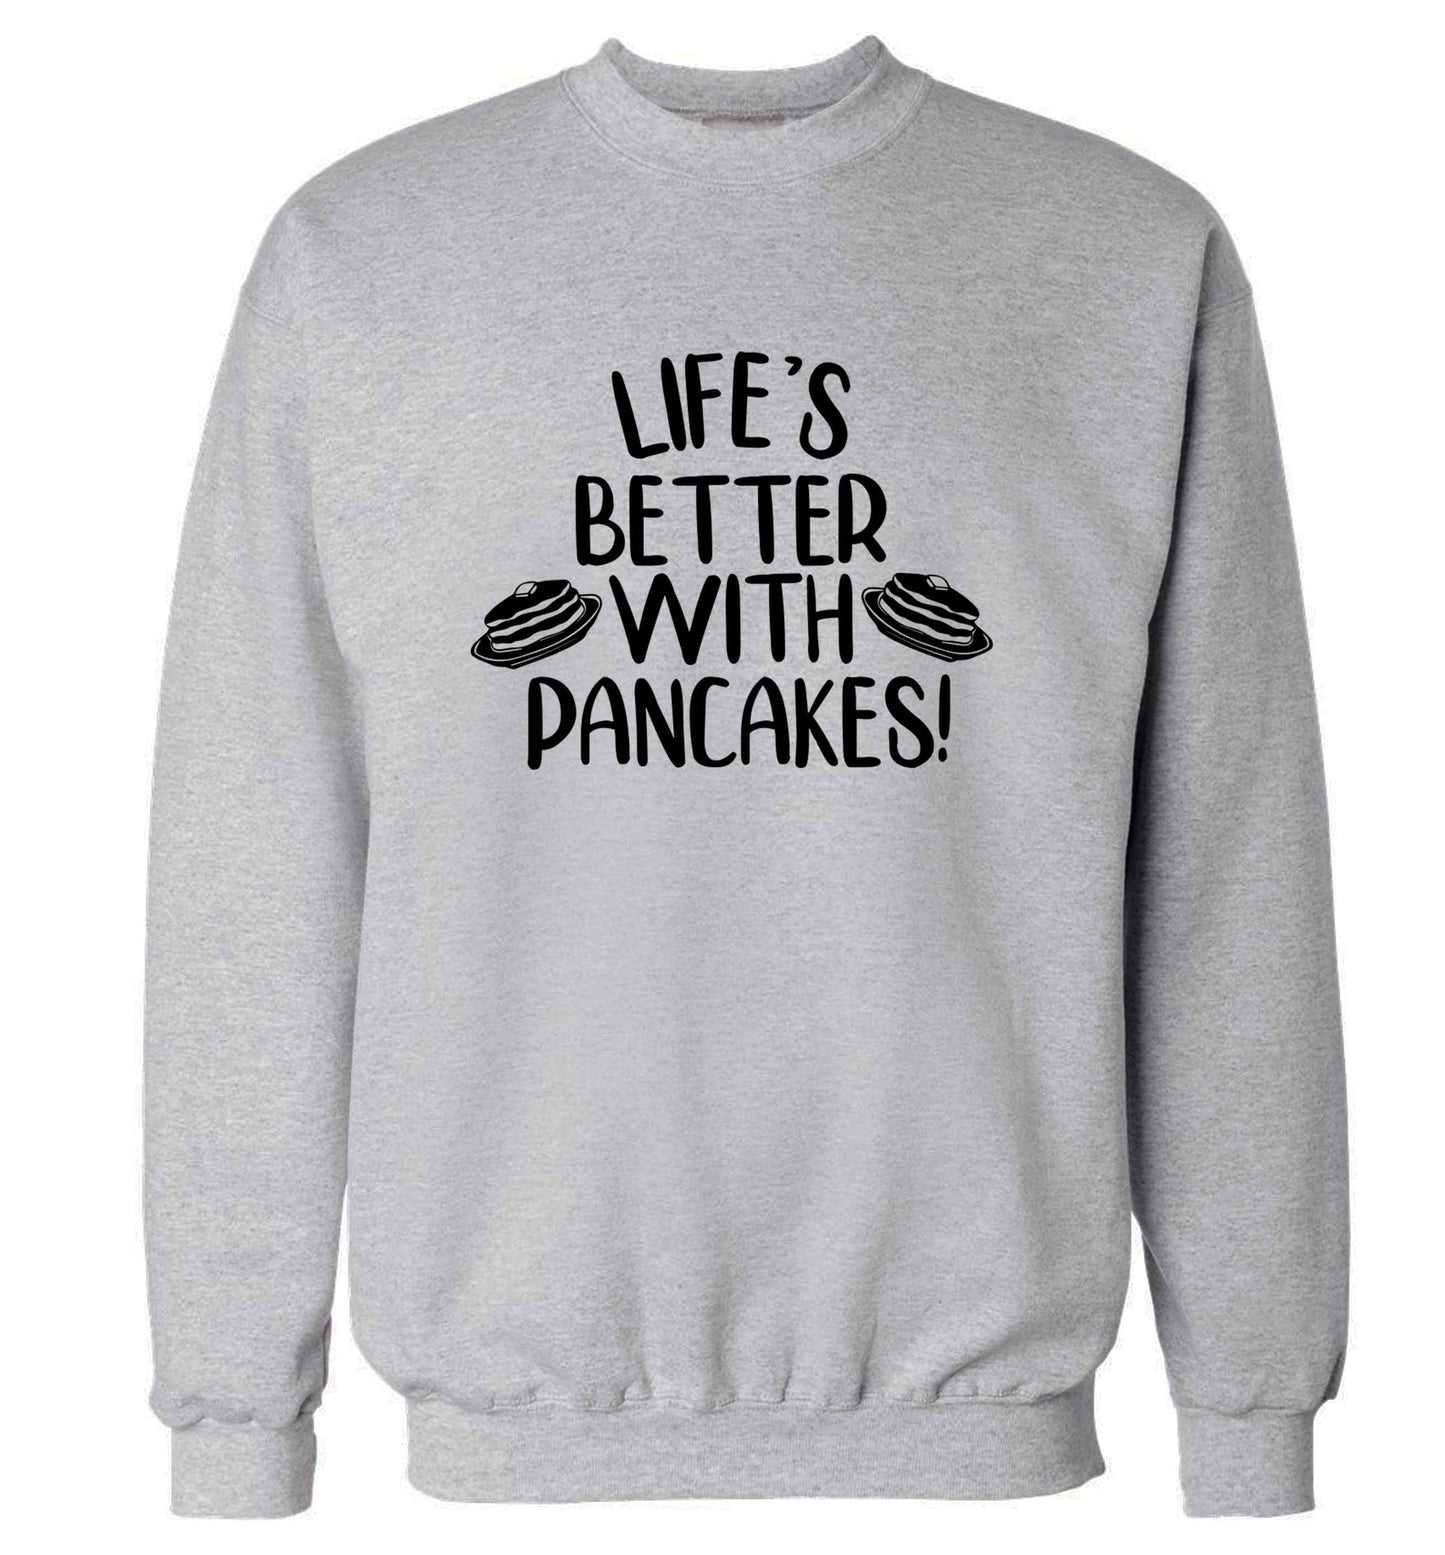 Life's better with pancakes adult's unisex grey sweater 2XL